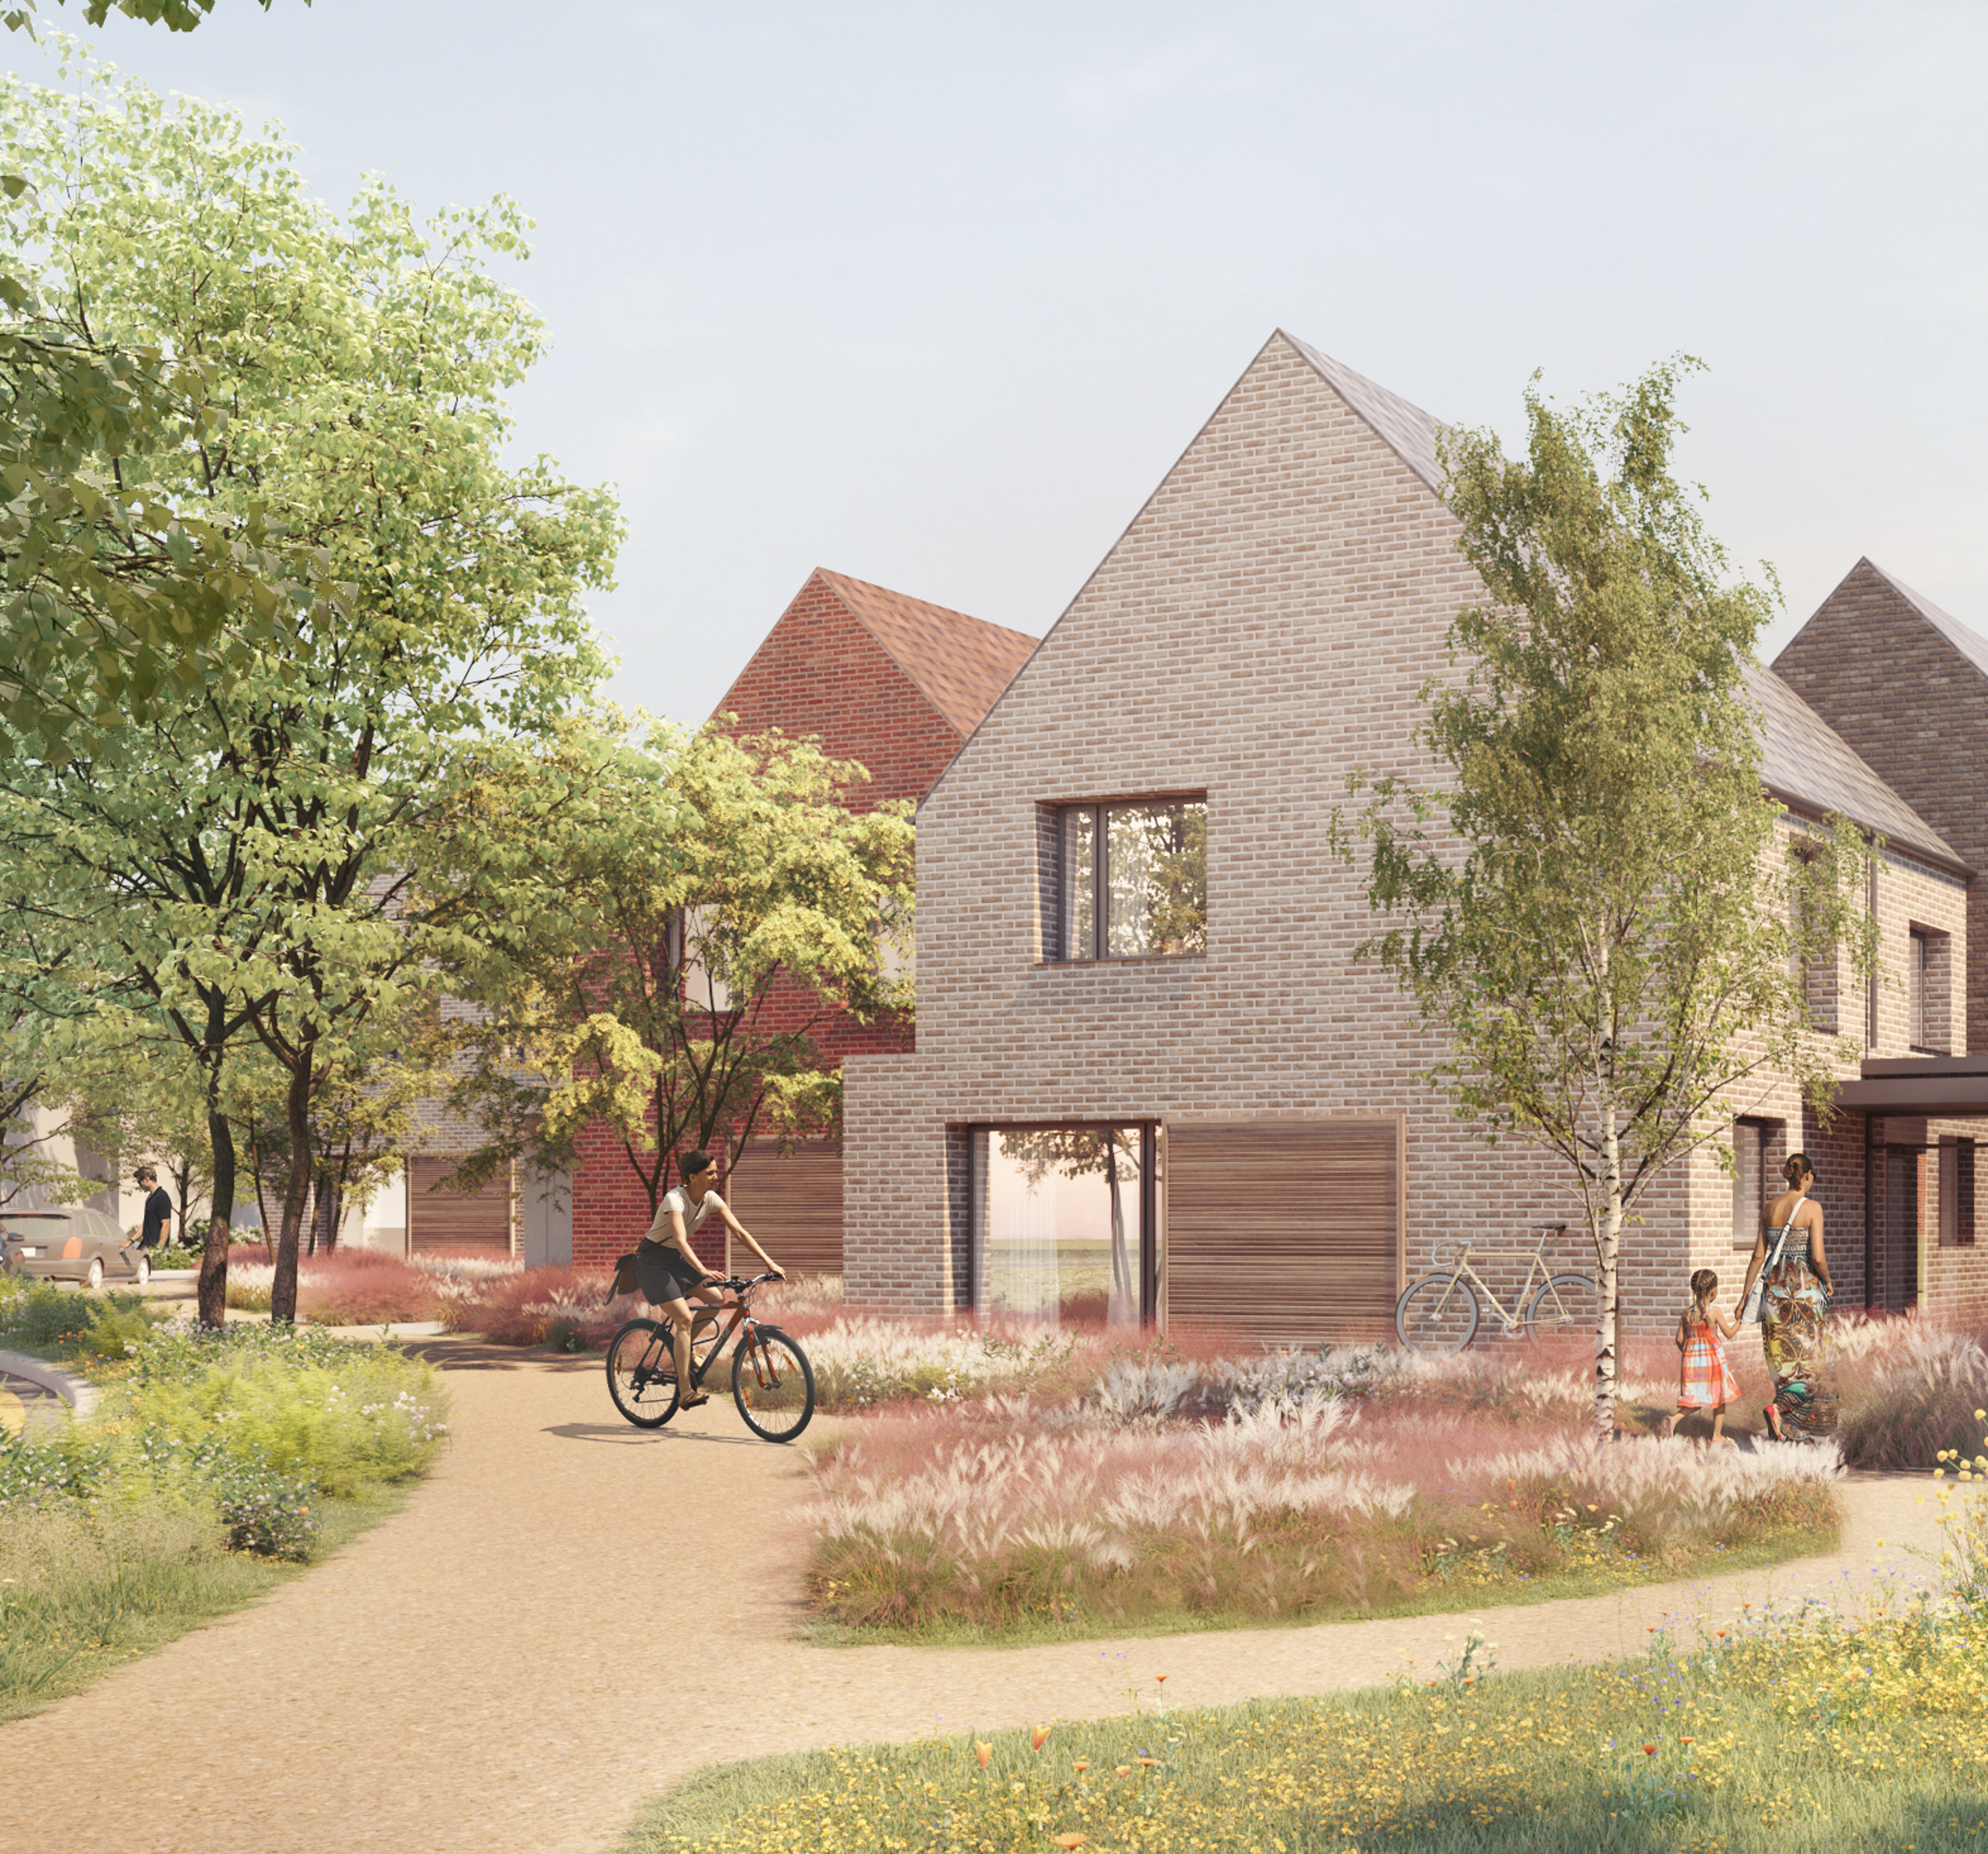 Front visualisation of new Woodland Villas project by CDC studio